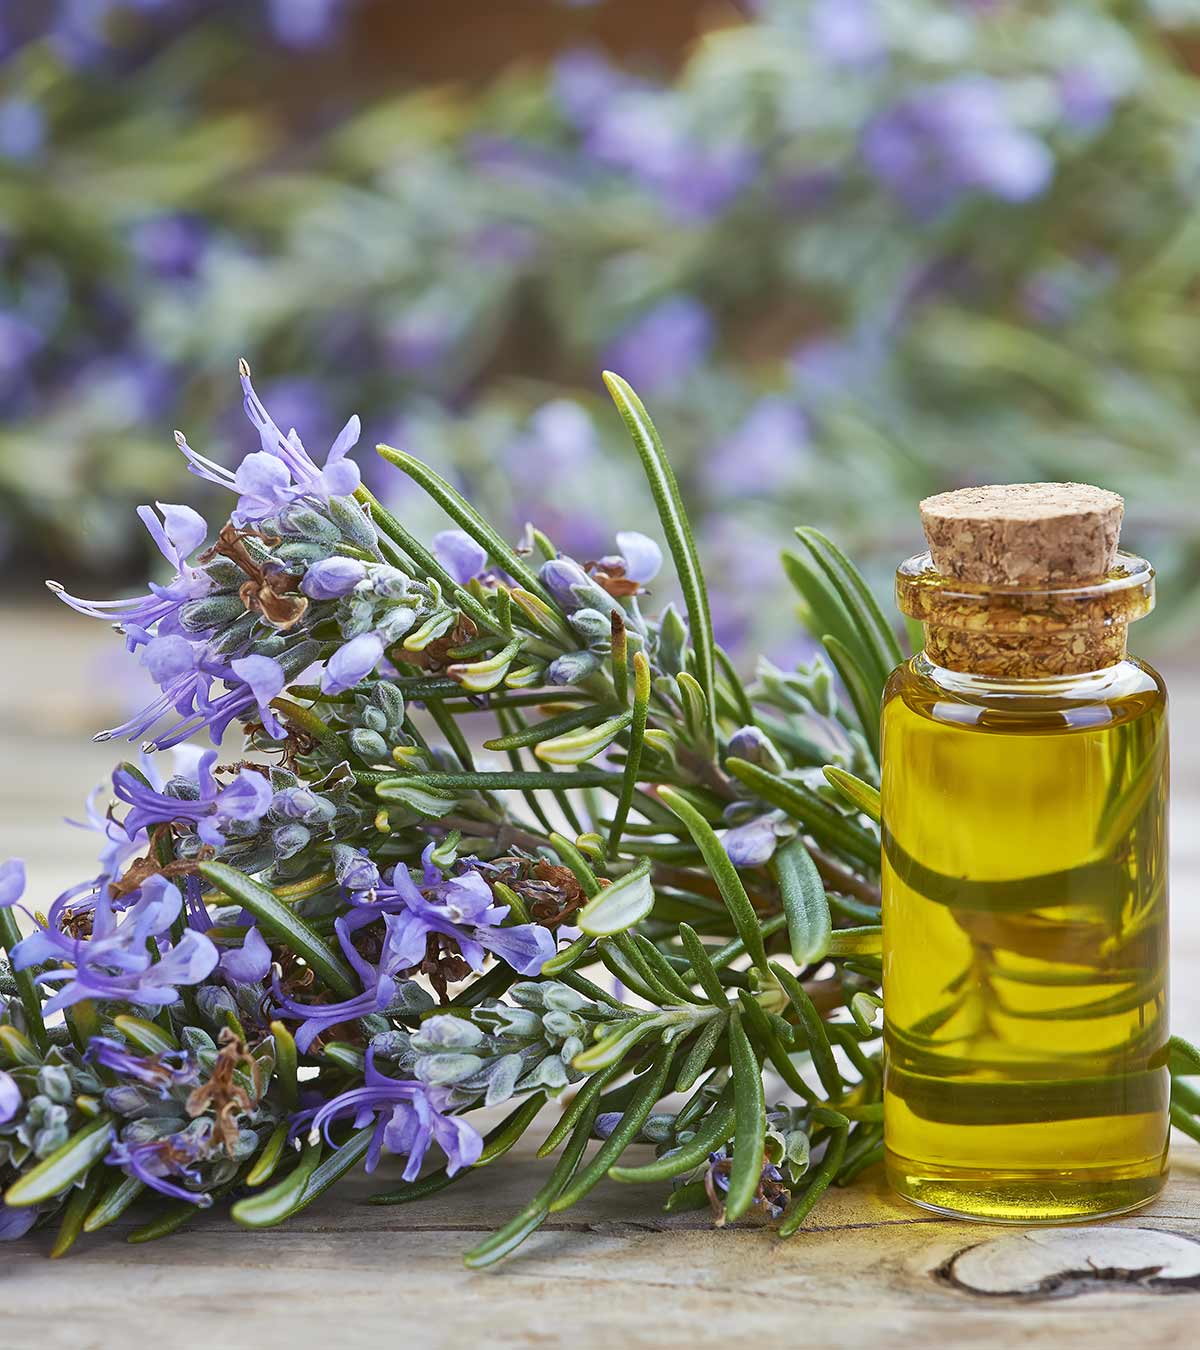 6 Health Benefits Of Using Rosemary Oil During Pregnancy